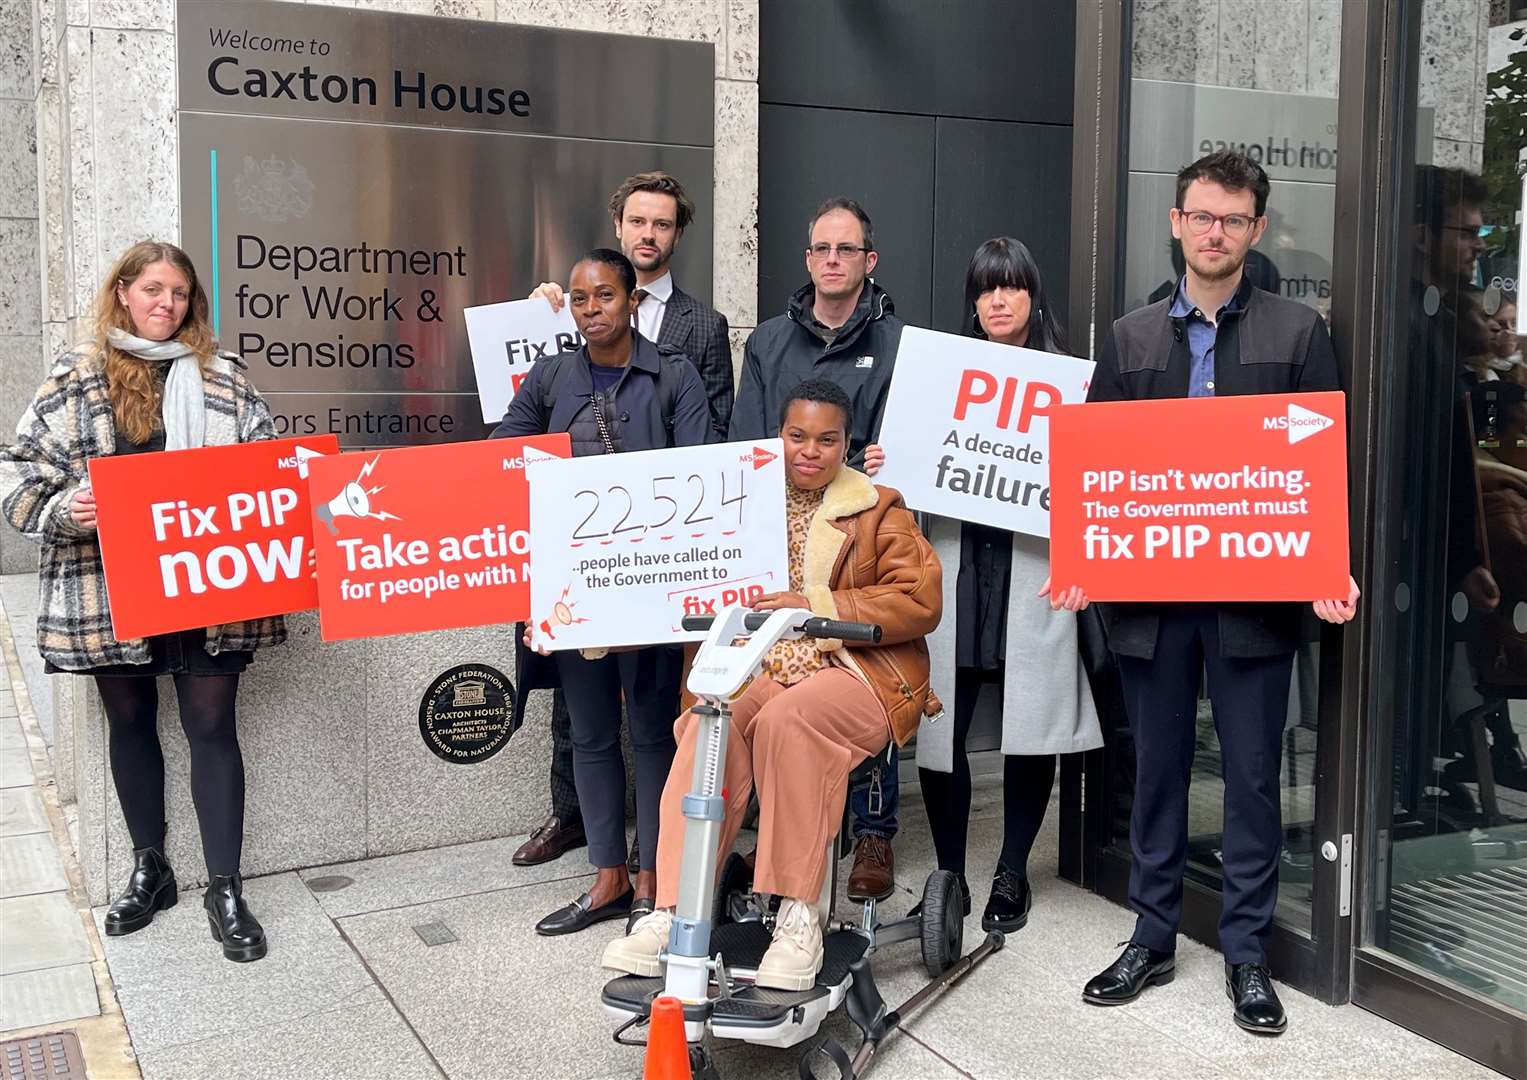 Shereena Aitken-Grey was joined by others living with MS to attend a parliamentary event about the devastating impact the Personal Independence Payment (PIP) assessment process is having on them